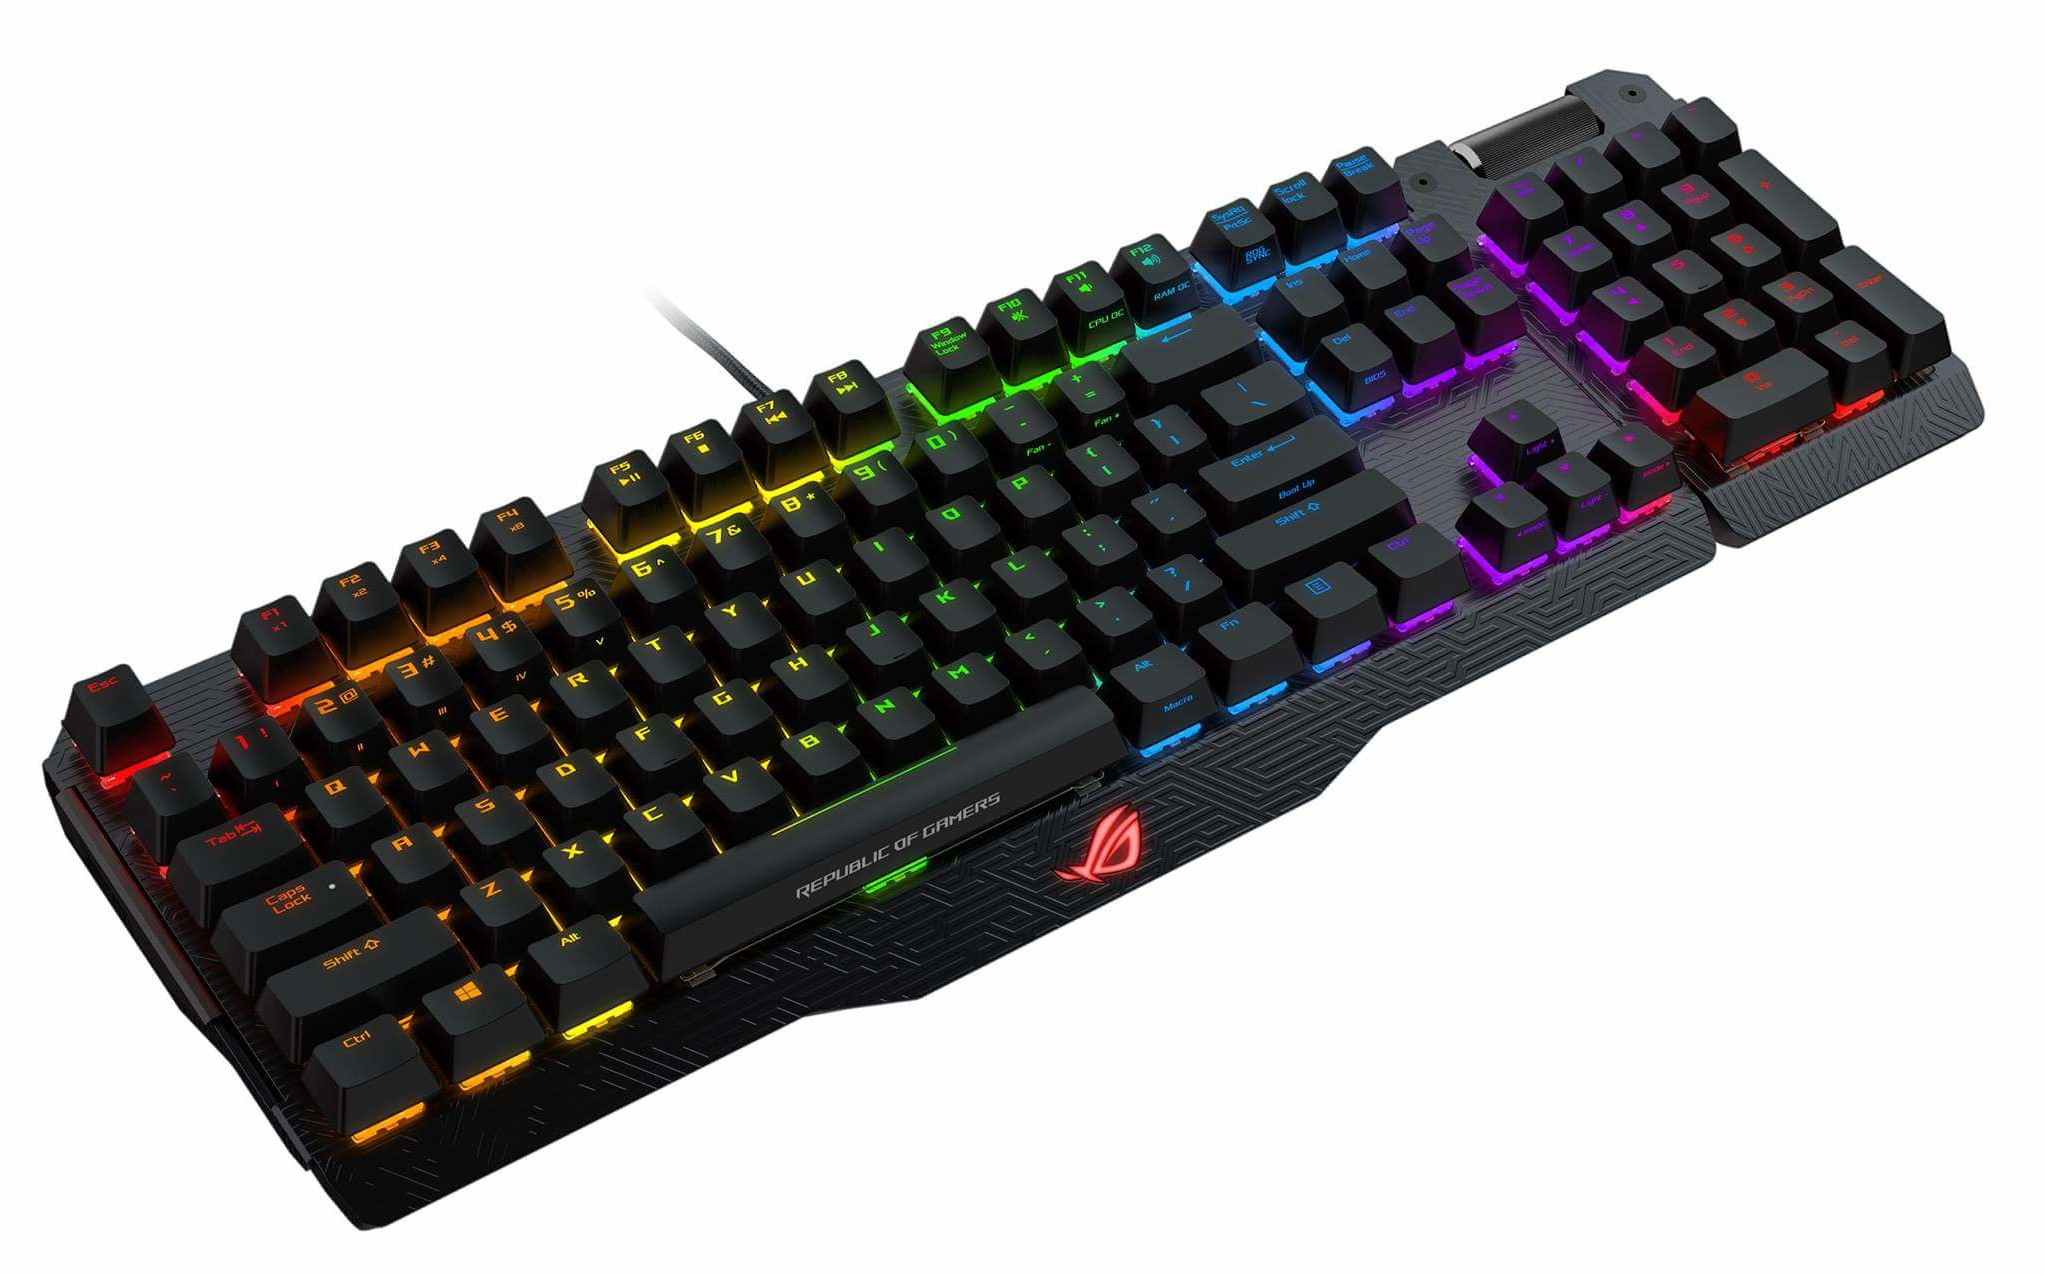 Claymore Gaming Keyboard Pictured TechPowerUp